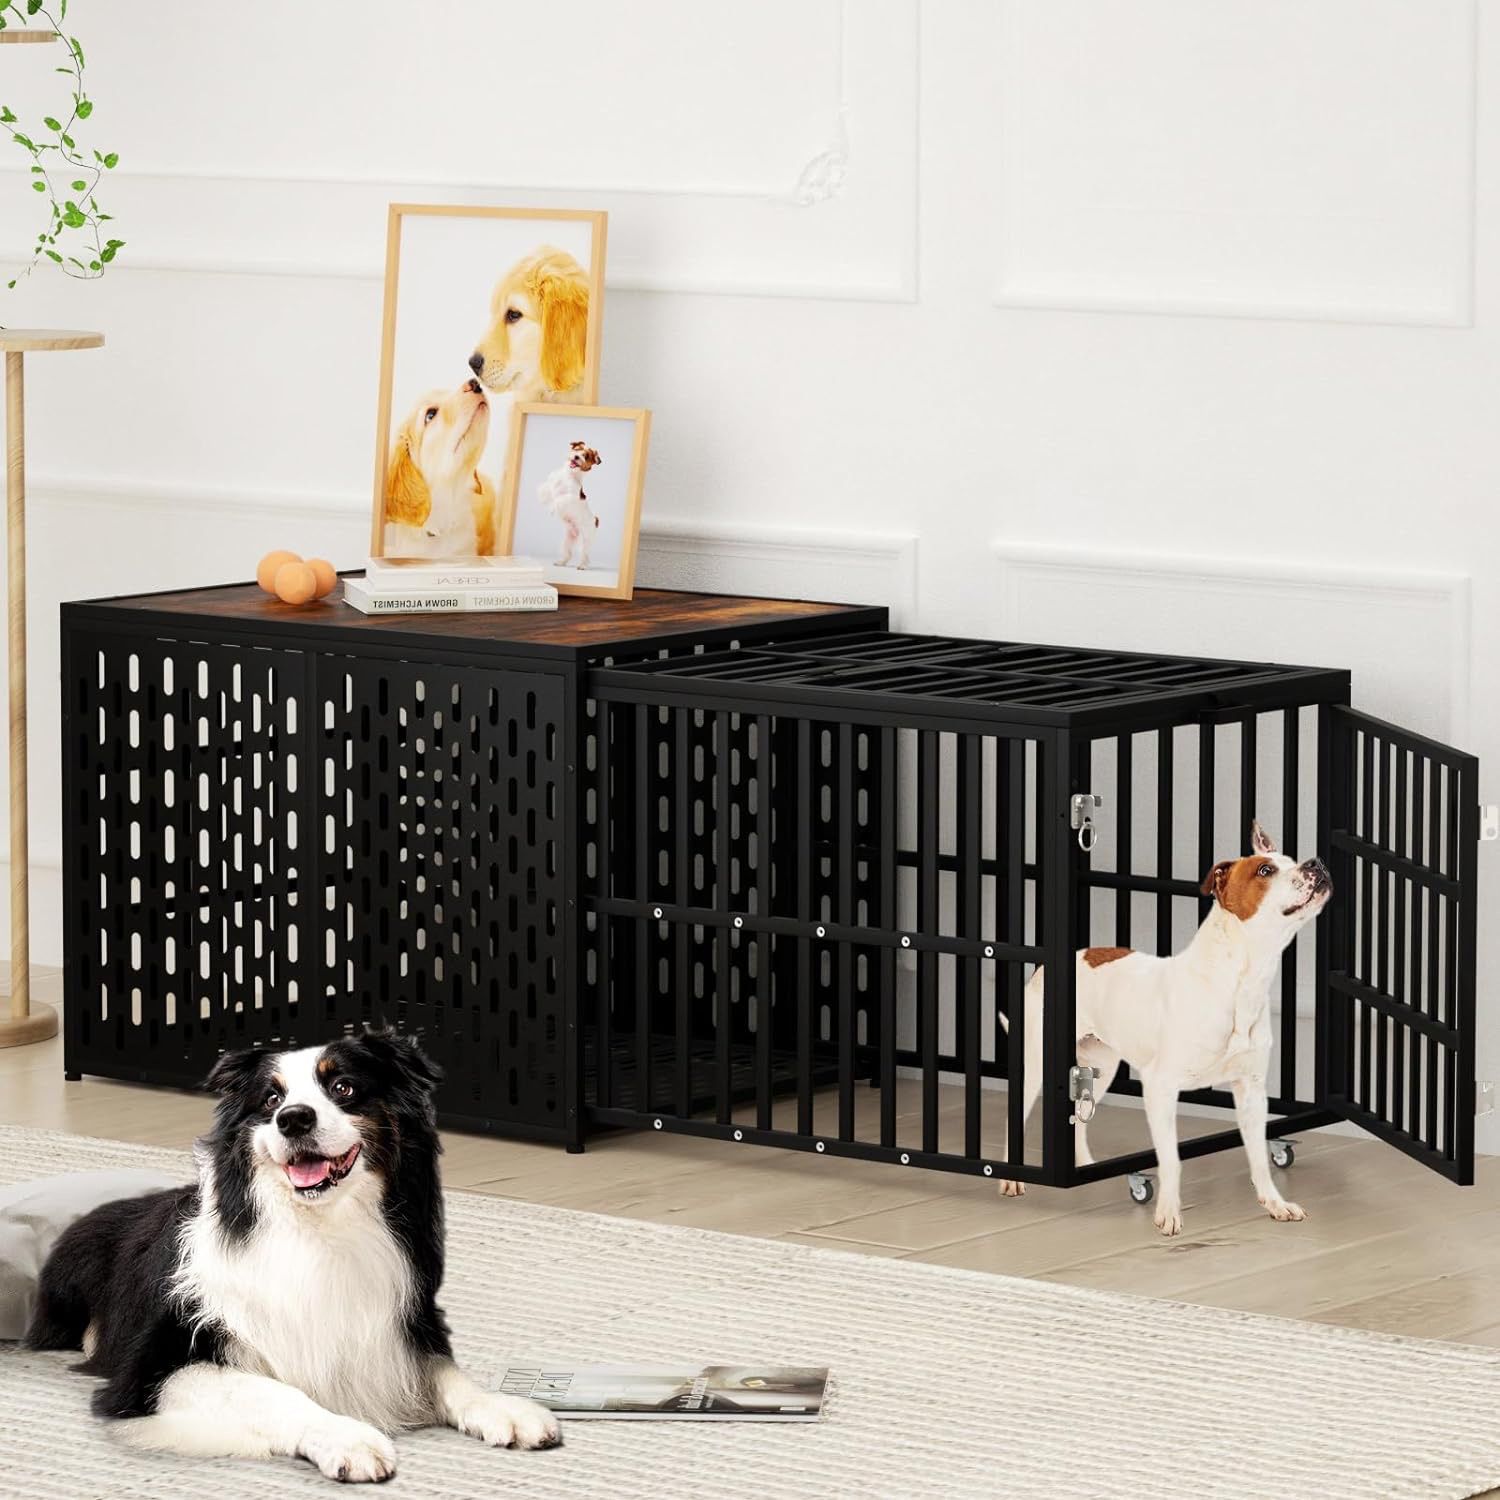 Heavy Duty Dog Crate Furniture Dog Cage Kennel Pull-Out Design & 3 Doors, Strong Metal Large Pet Crates and Kennel for Dogs, Length Adjustable from 38